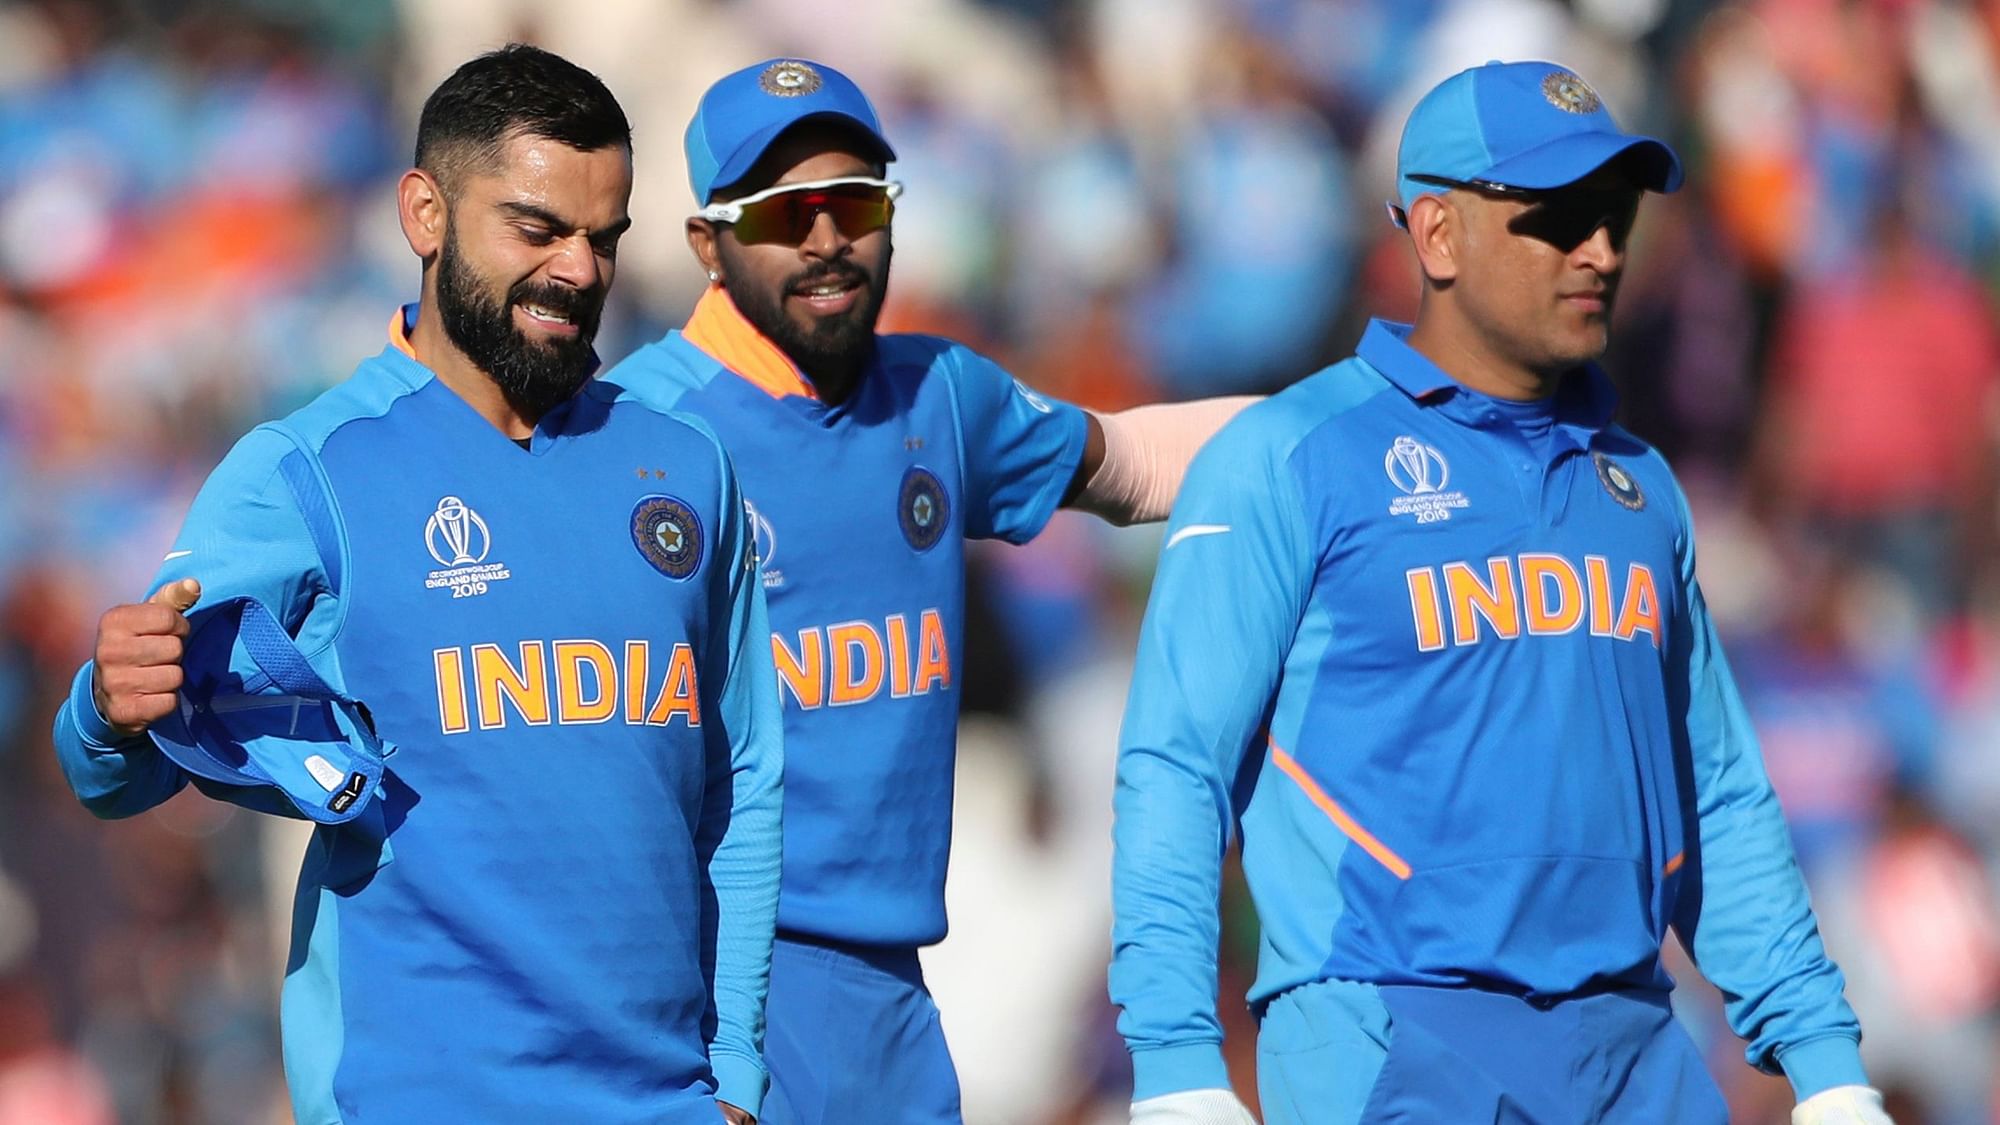 India captain Virat Kohli said the hard-fought win over Afghanistan in the Word Cup was much-needed.